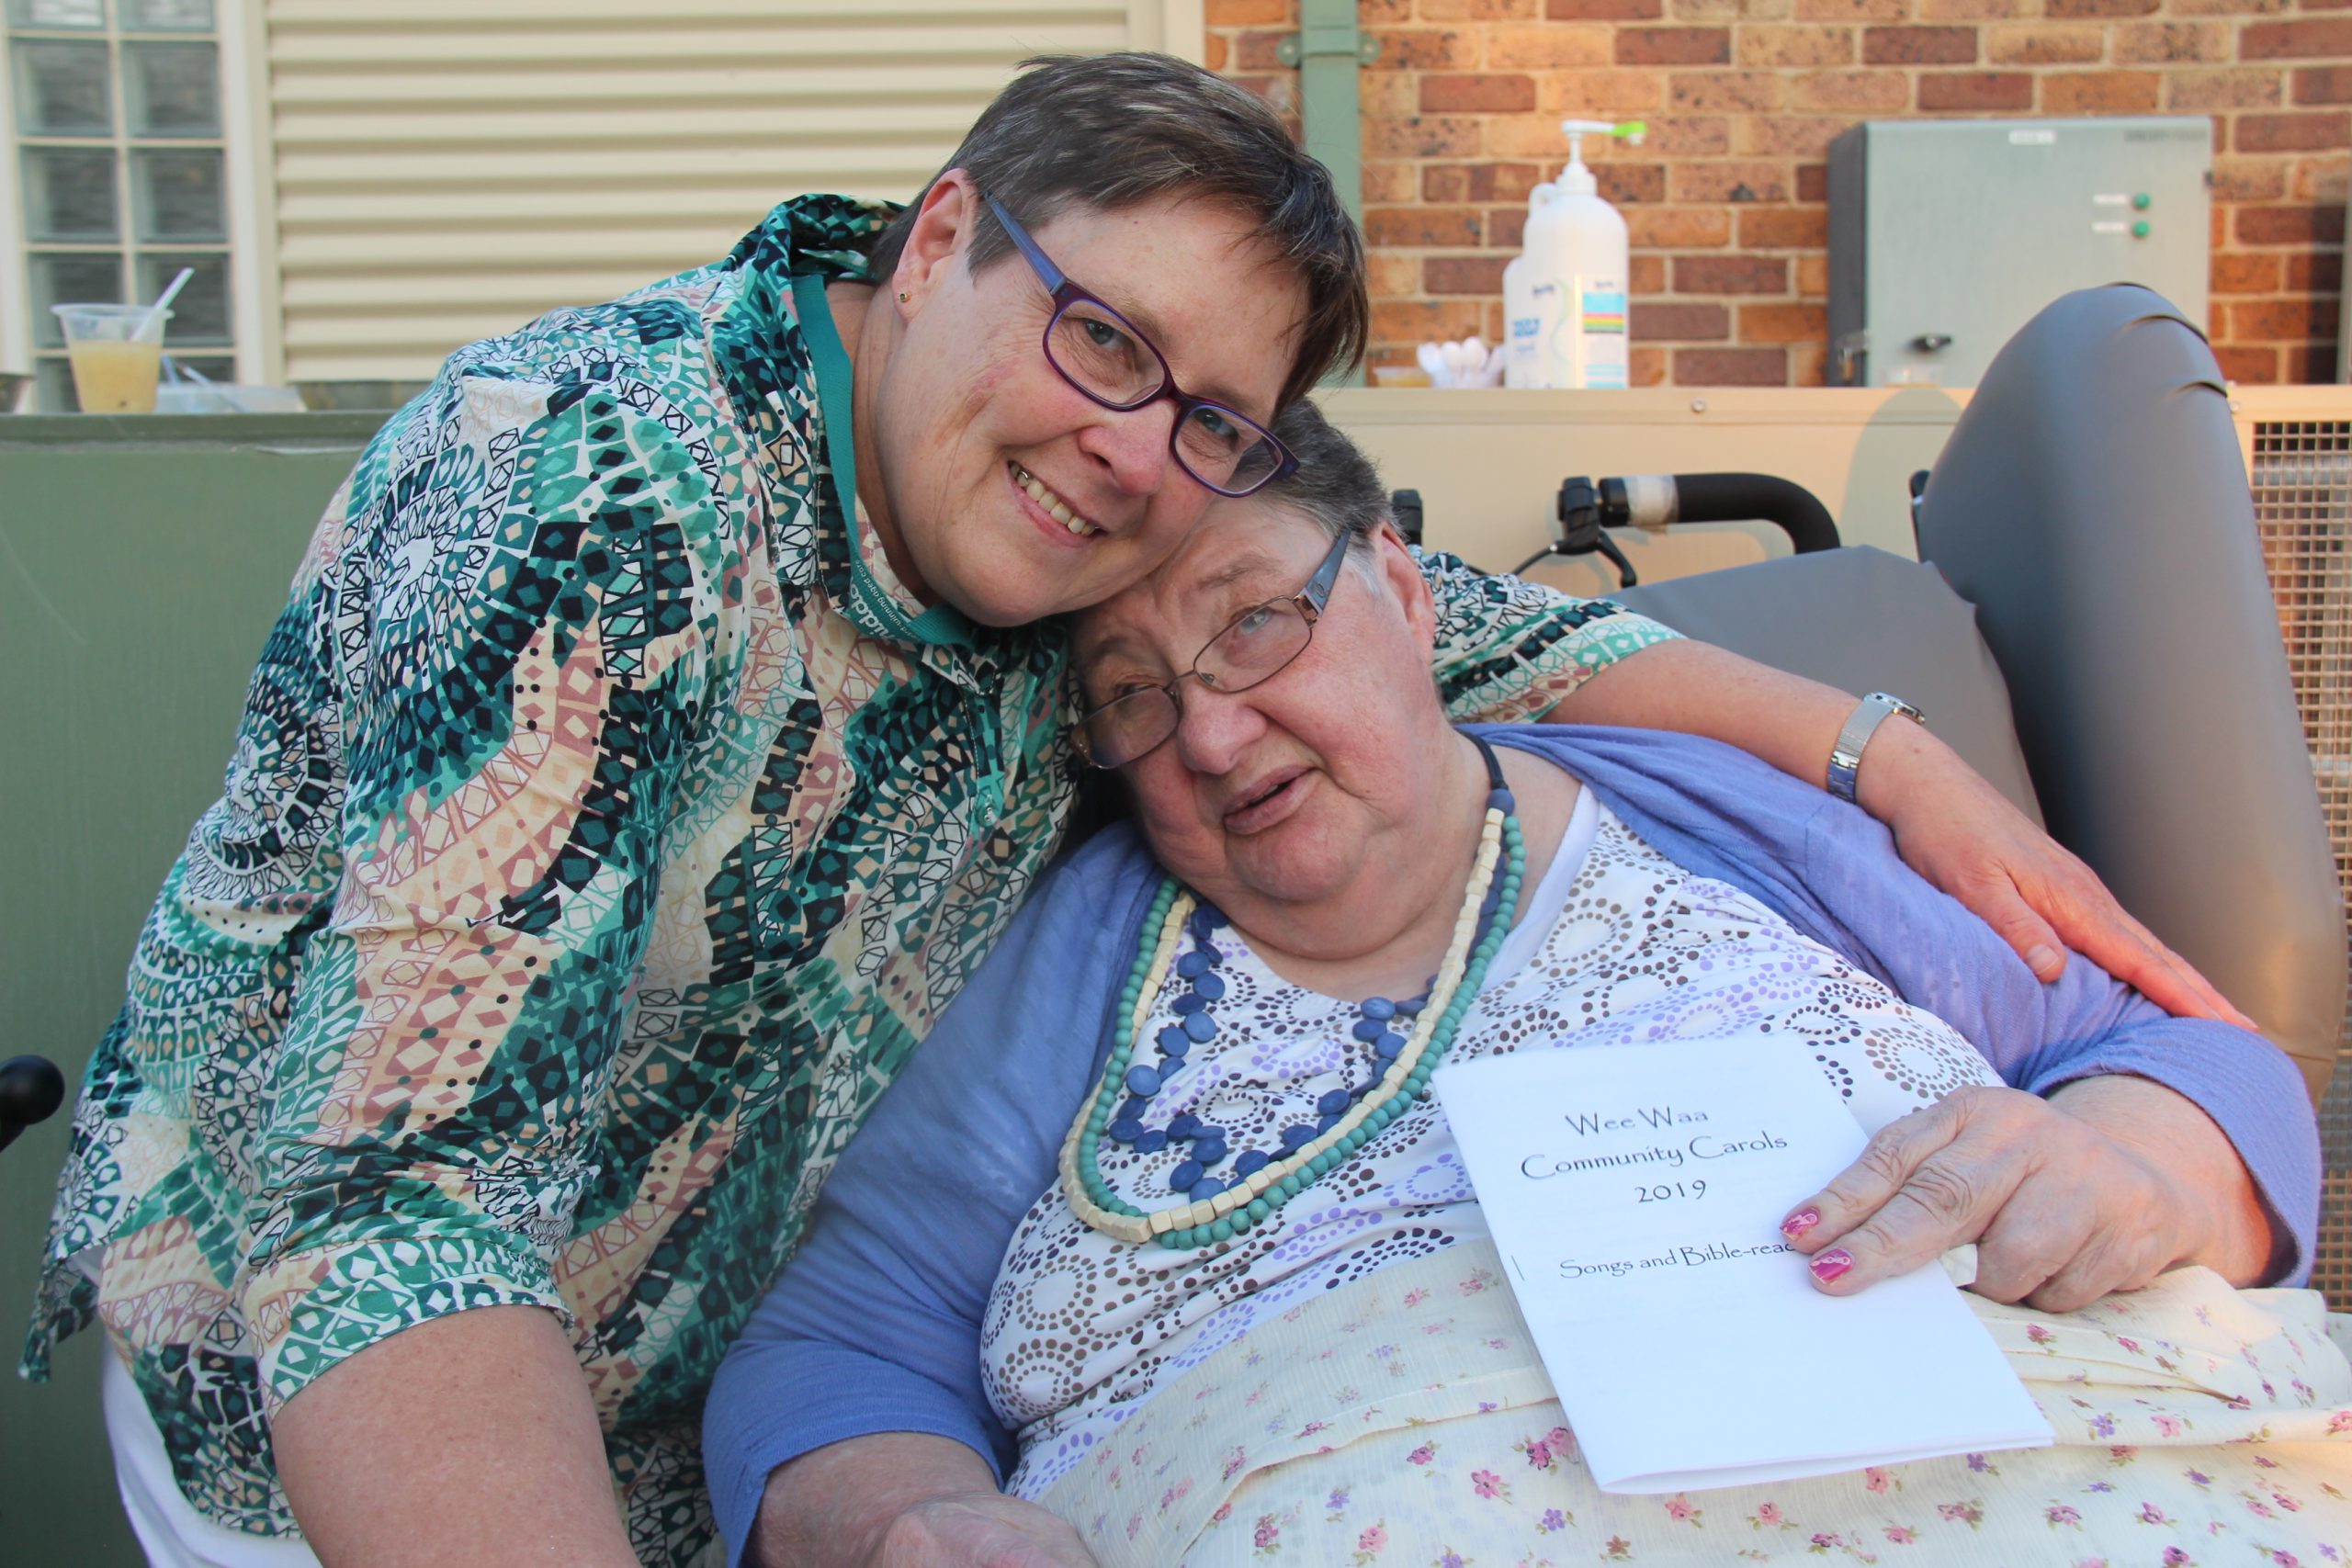 Left: Liz Berger and the late Sylvia Radford pictured at the Wee Waa Christmas Carols in 2019.